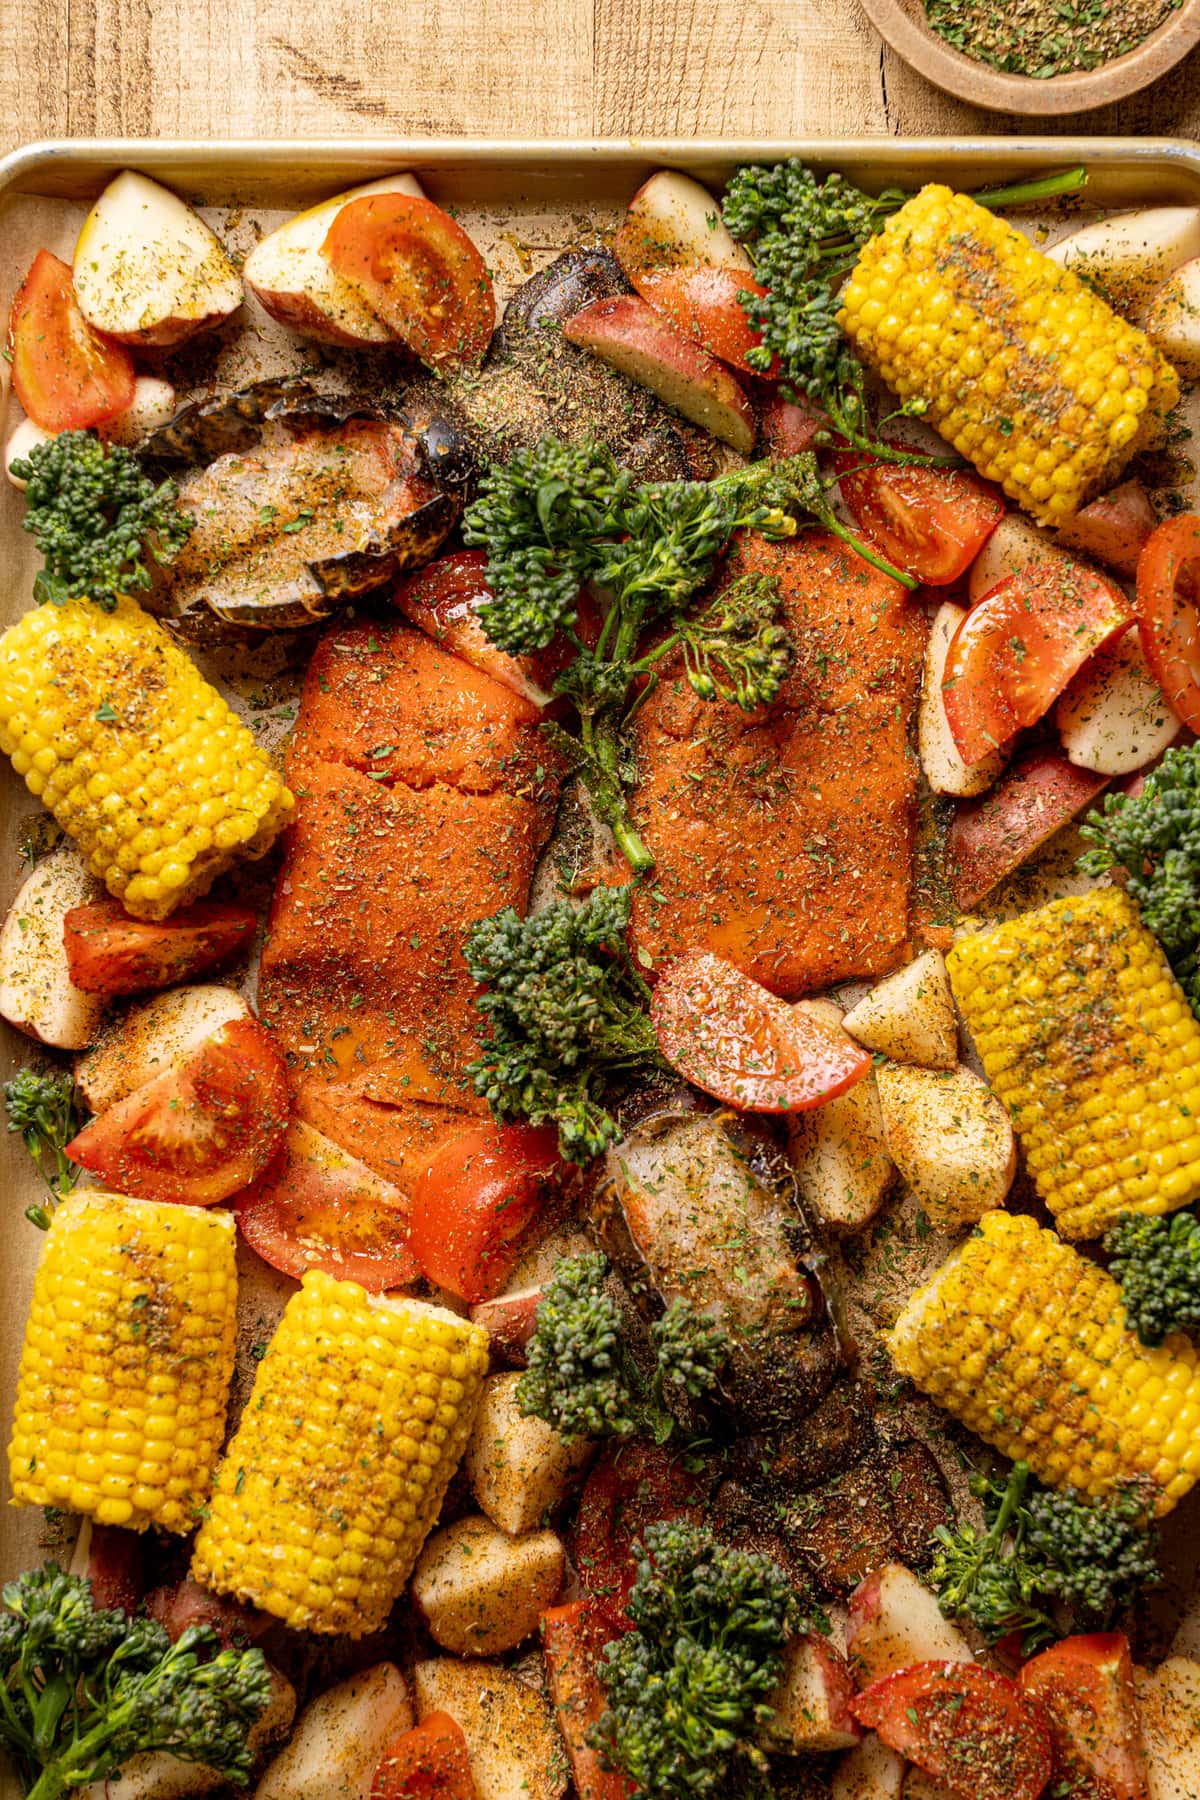 Sheet pan with seasoned and uncooked salmon, lobster, and vegetables 